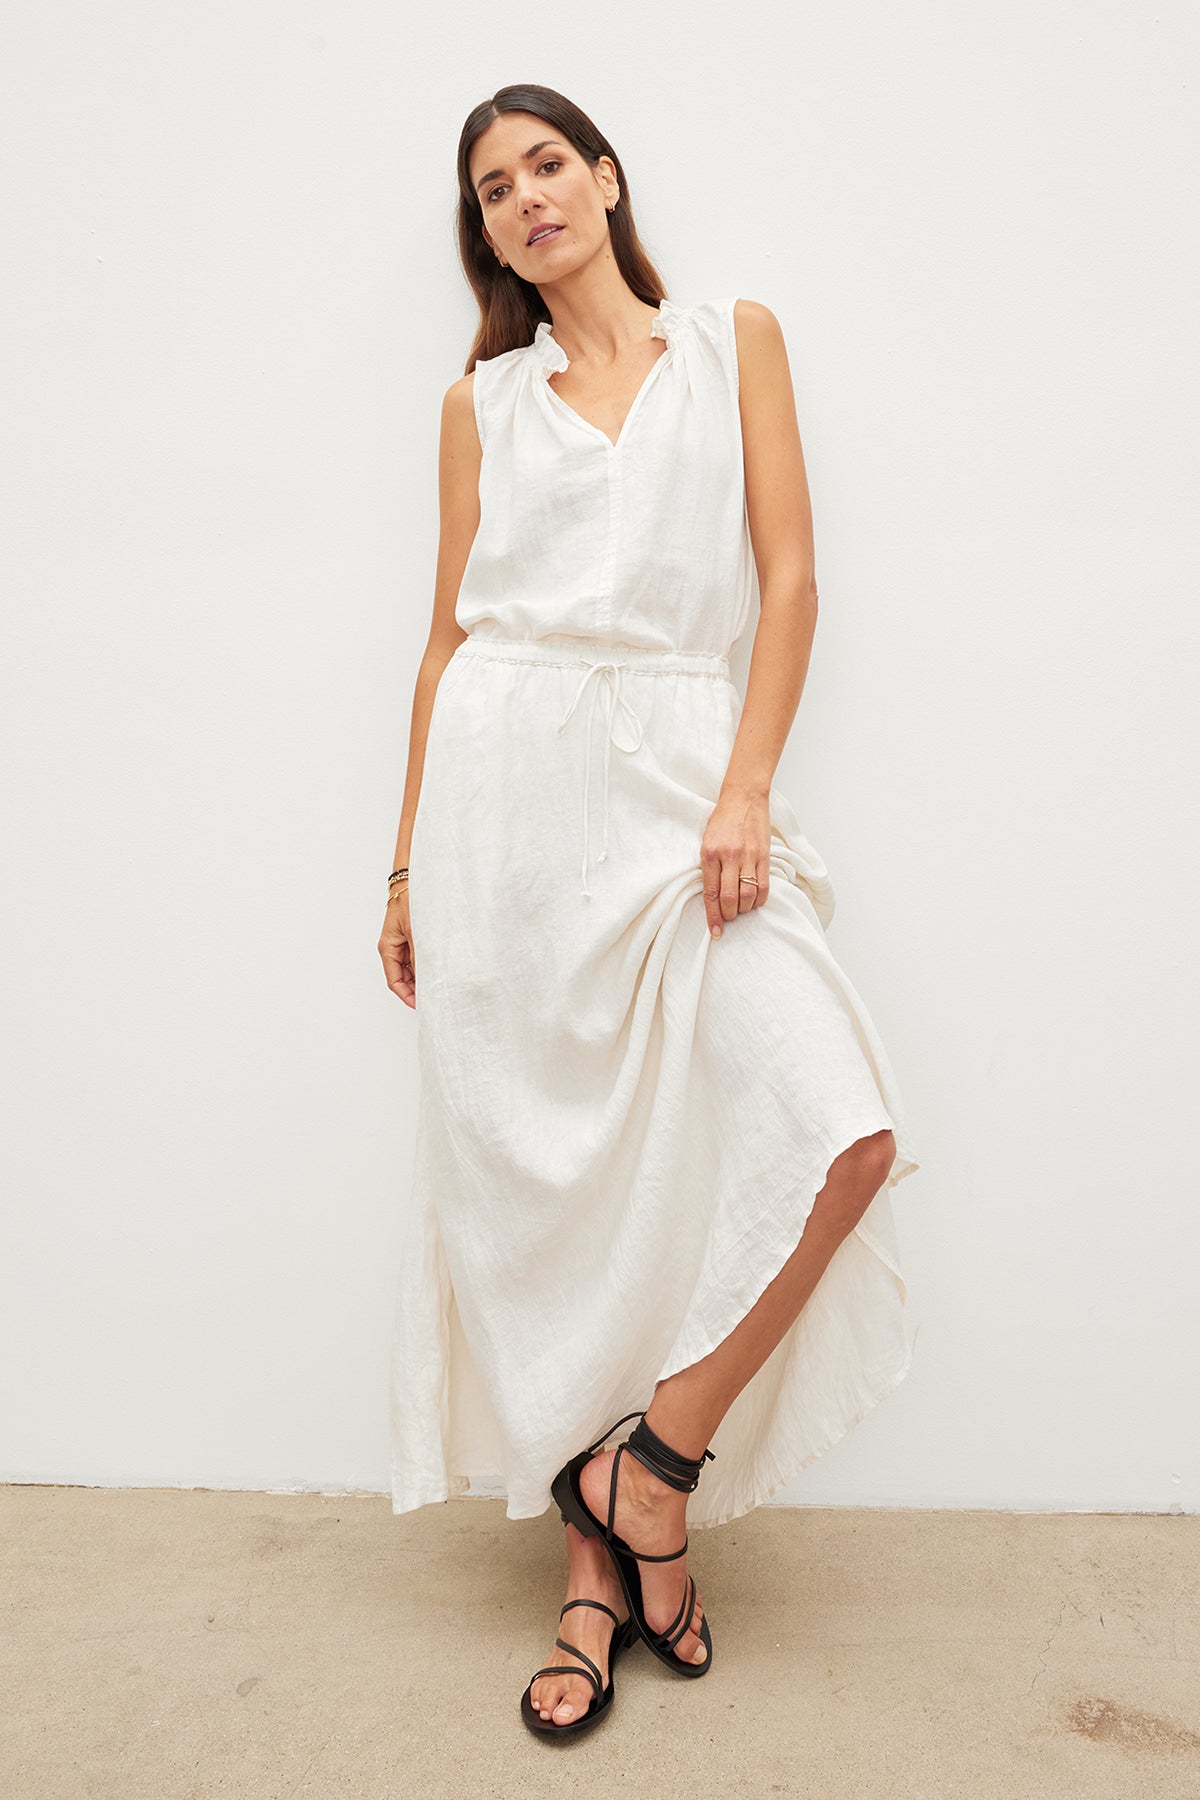 A woman wearing a white Velvet by Graham & Spencer MASIE LINEN TANK TOP and sandals.-36010172285121